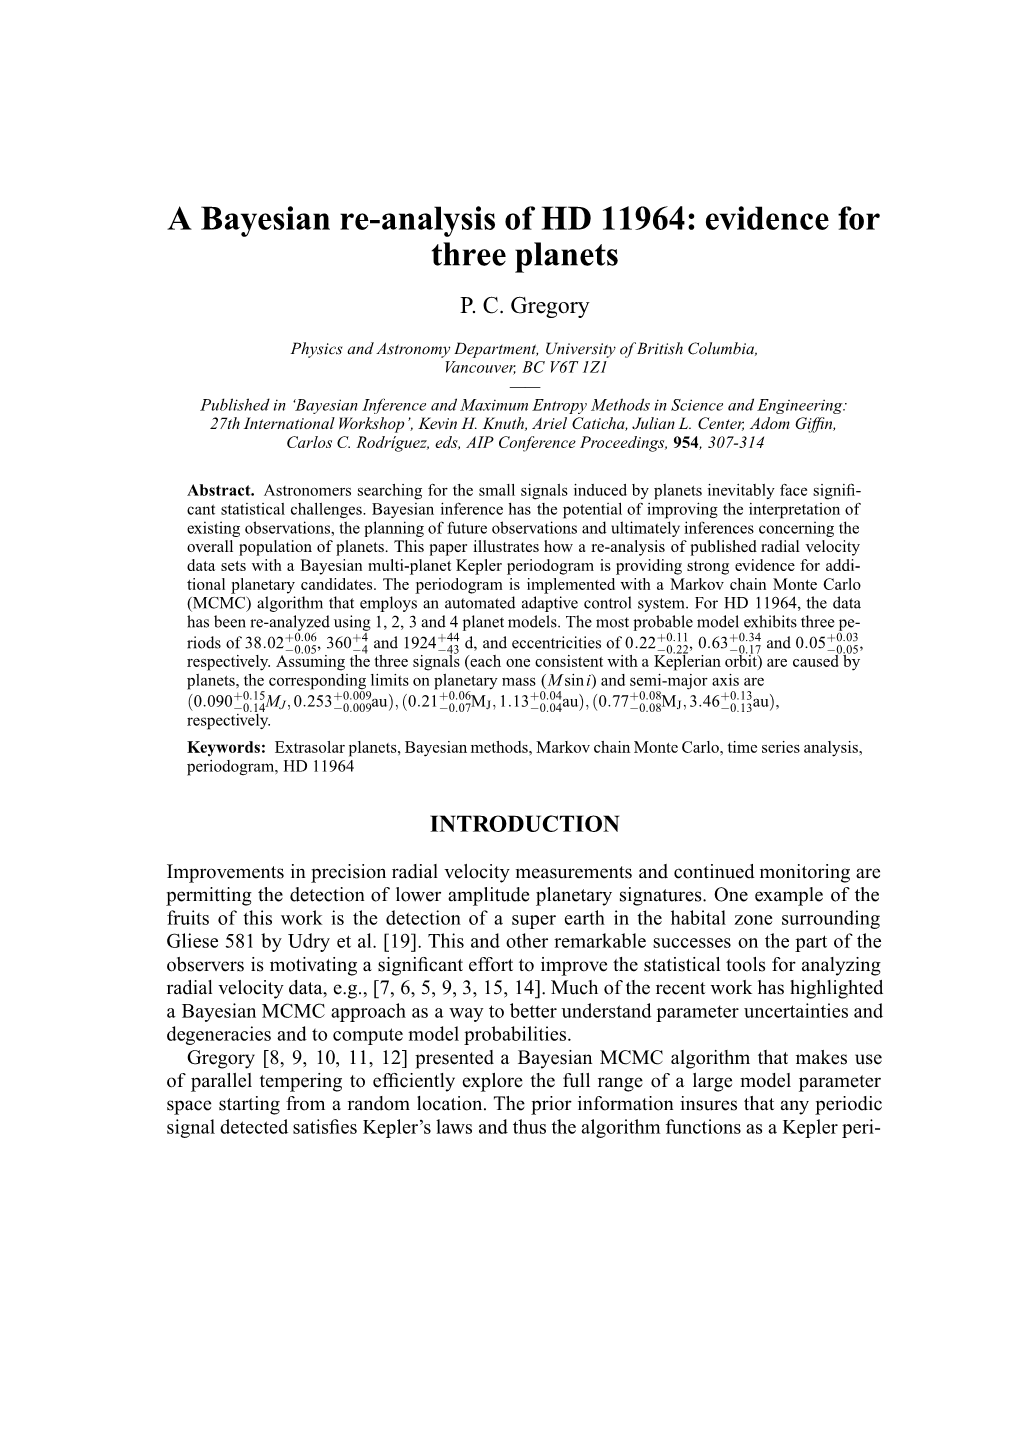 A Bayesian Re-Analysis of HD 11964: Evidence for Three Planets P